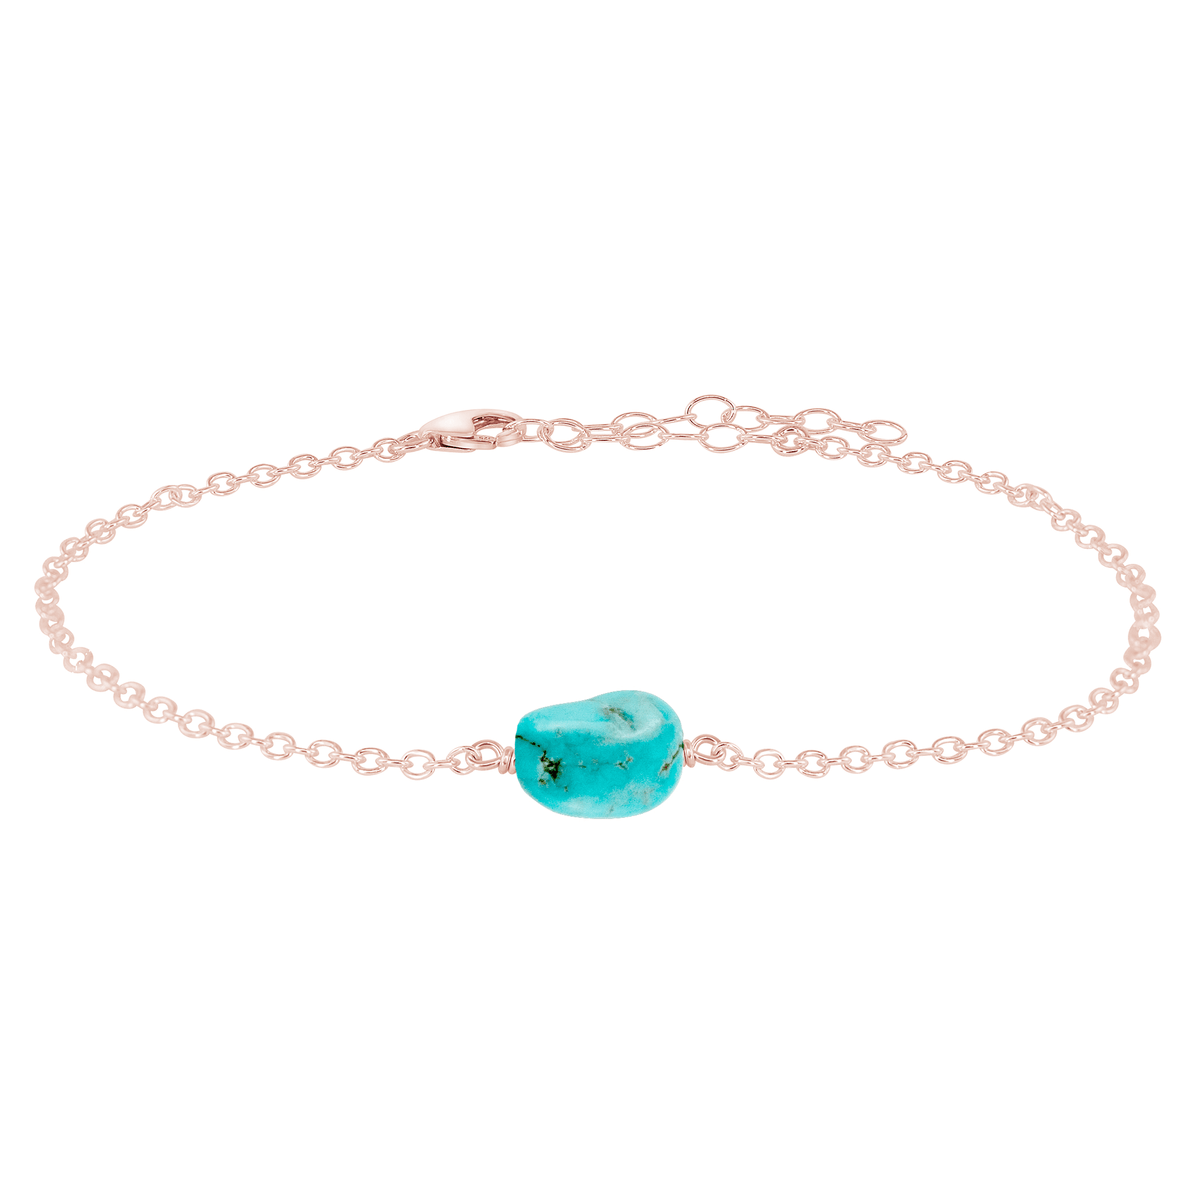 Raw Nugget Anklet - Turquoise - 14K Rose Gold Fill - Luna Tide Handmade Jewellery